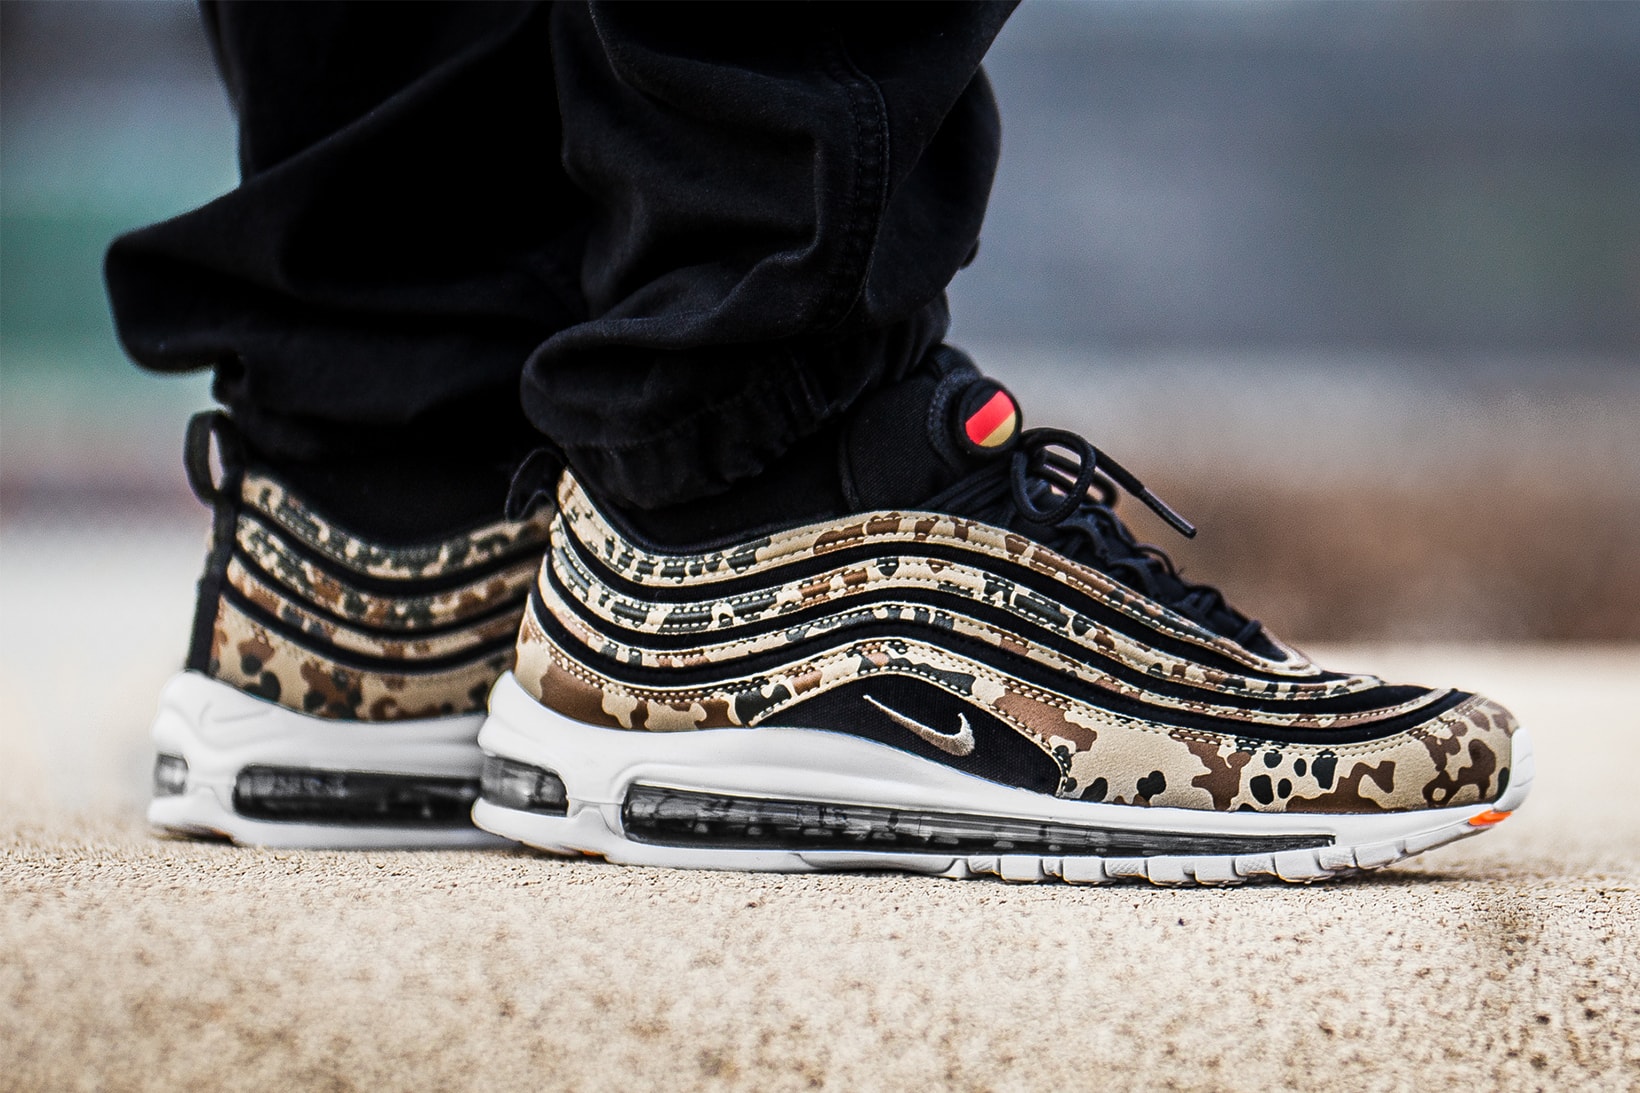 Integraal petticoat Grondig Germany's Nike Air Max 97 "Country Camo" | Hypebeast